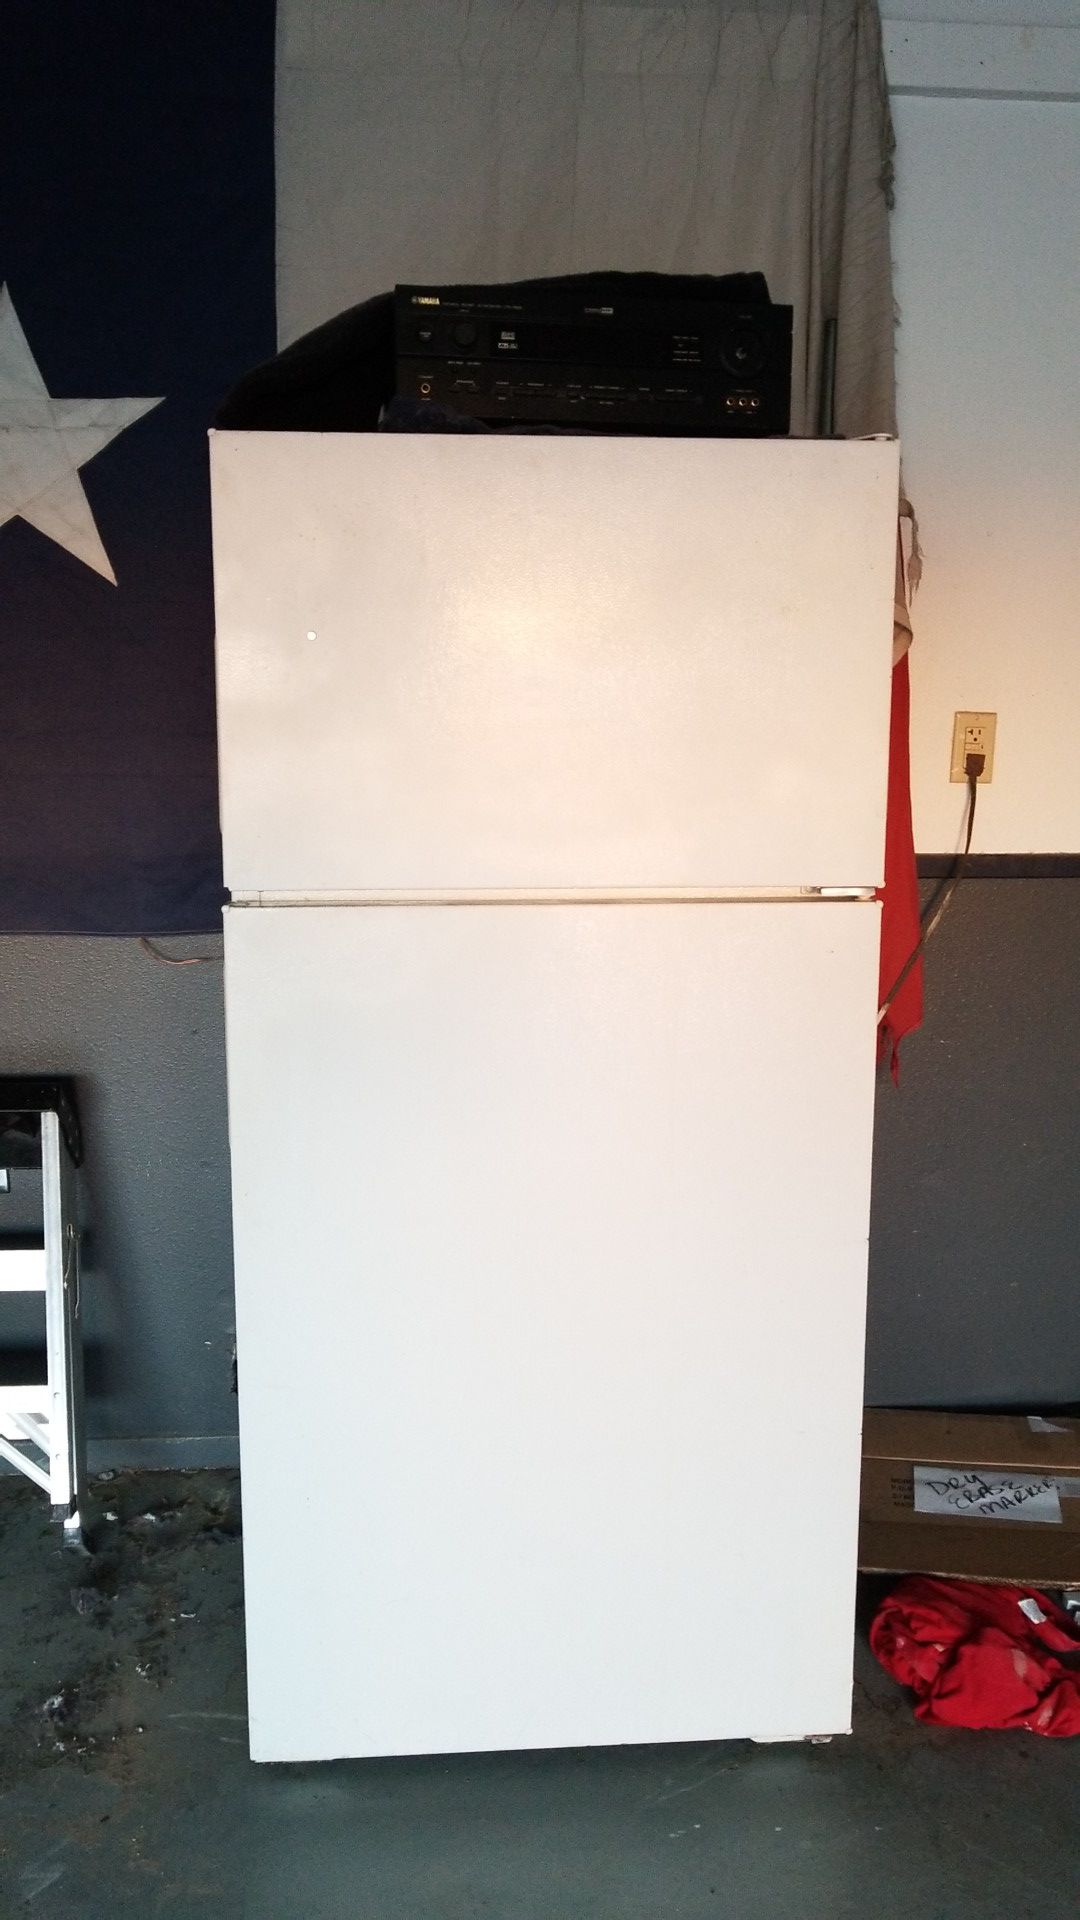 White Refrigerator great condition its in my garage to store xtra food or drinks its very cold.